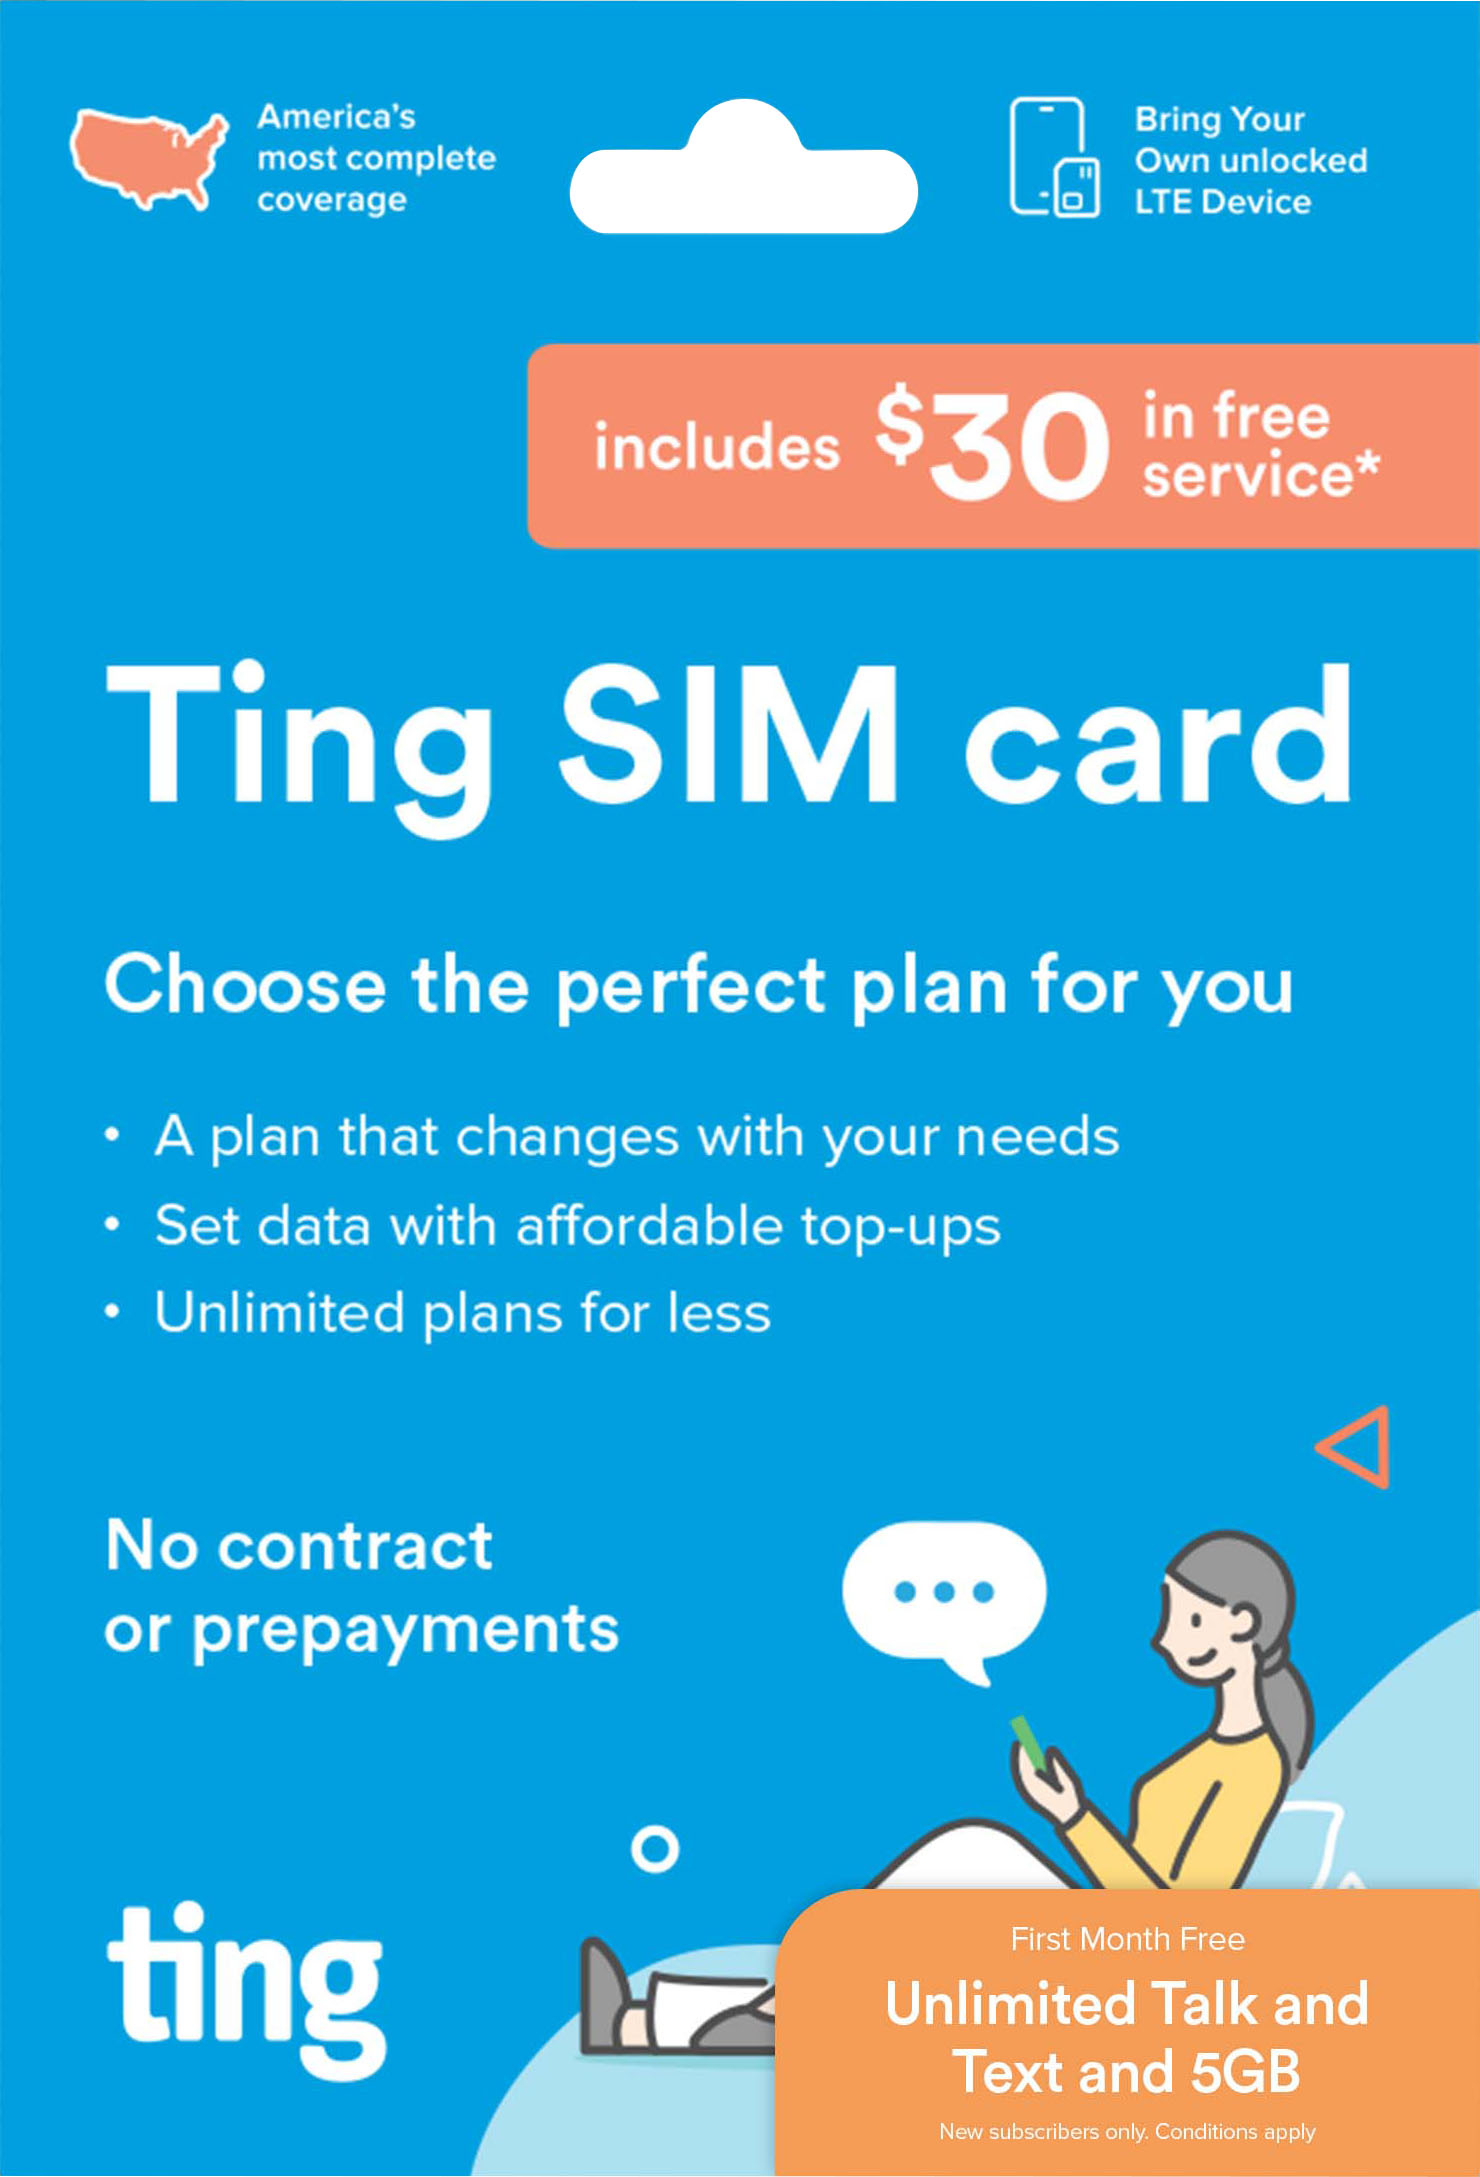 Ting Mobile Sim Card Kit w/$30 service credit included Blue  STRK-X3PACKRETAIL30 - Best Buy